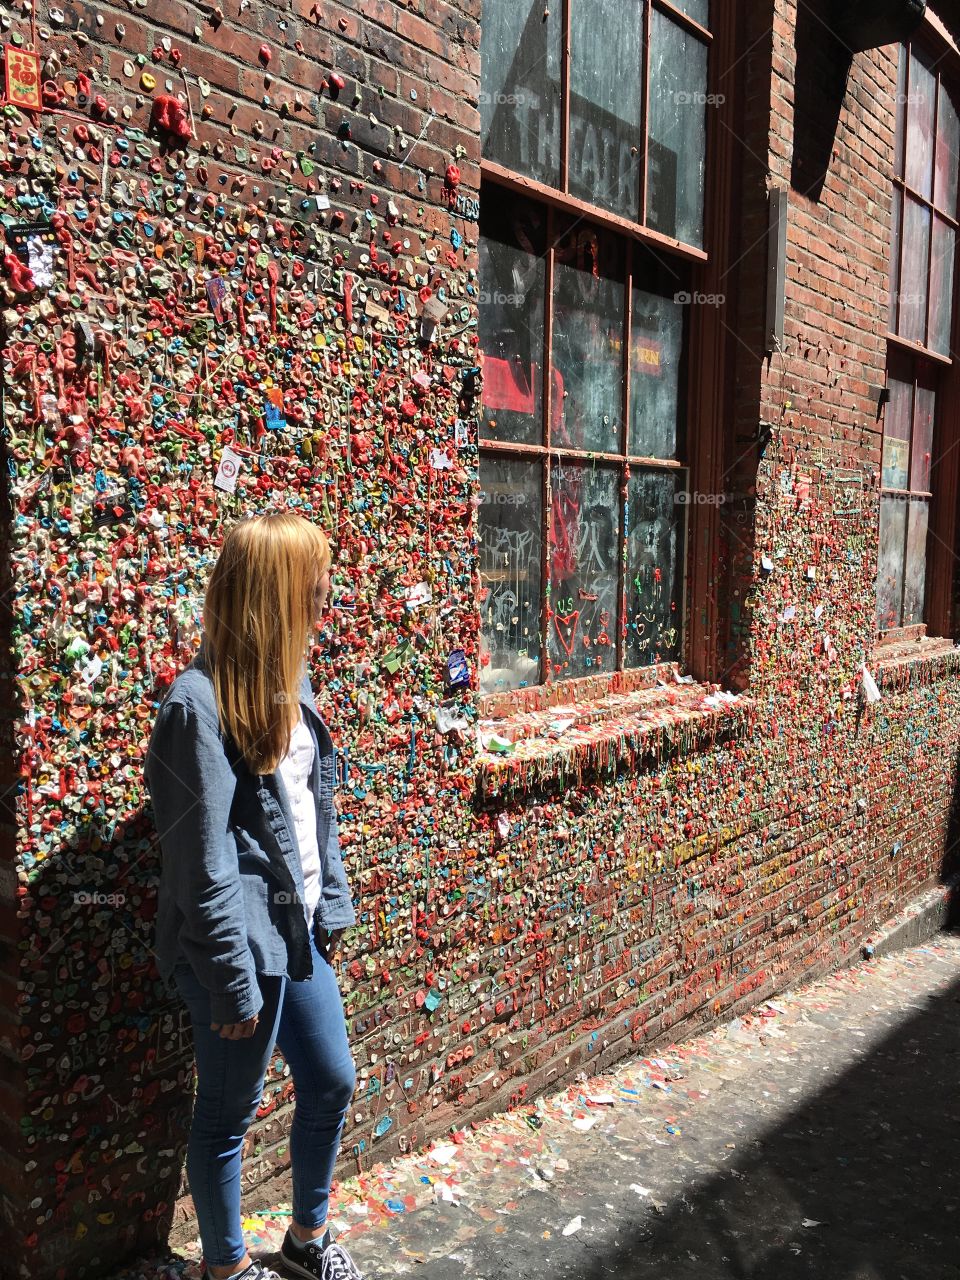 This is me at the gum wall